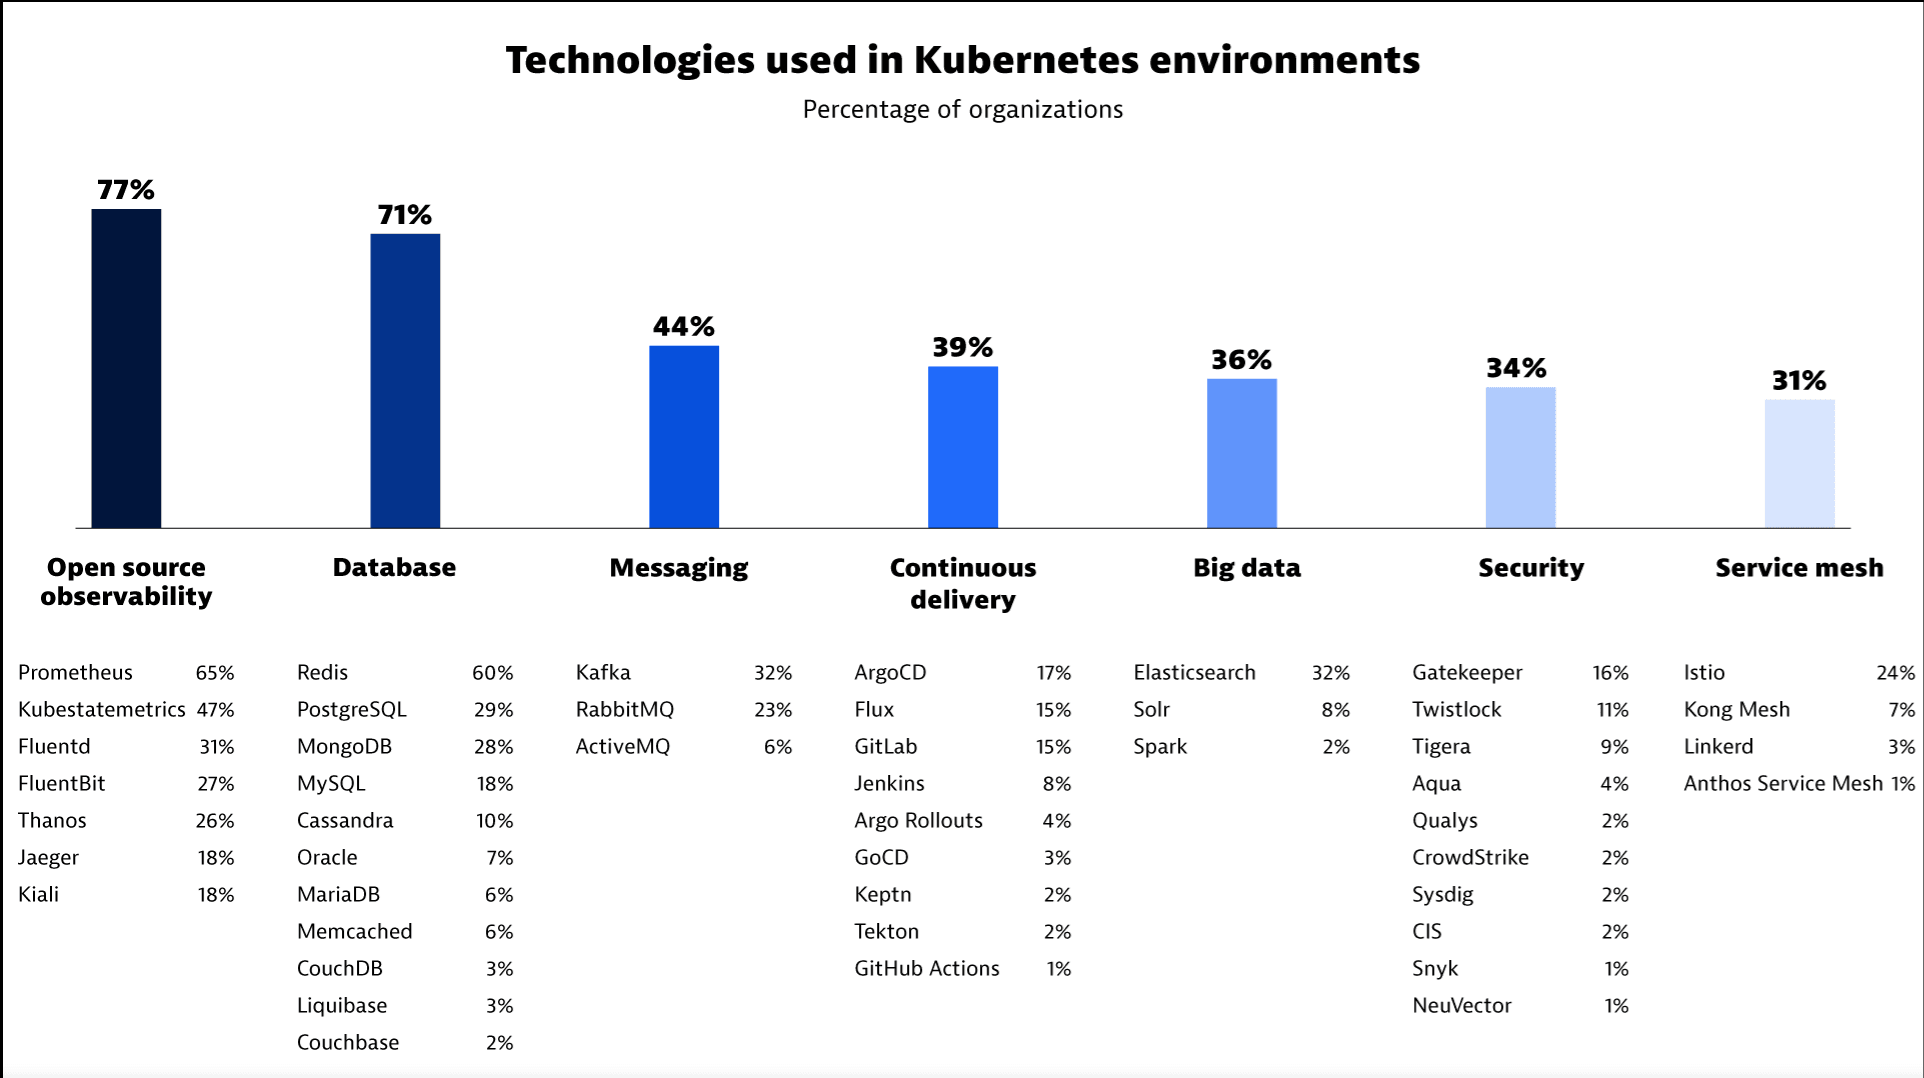 Technologies used in Kubernetes